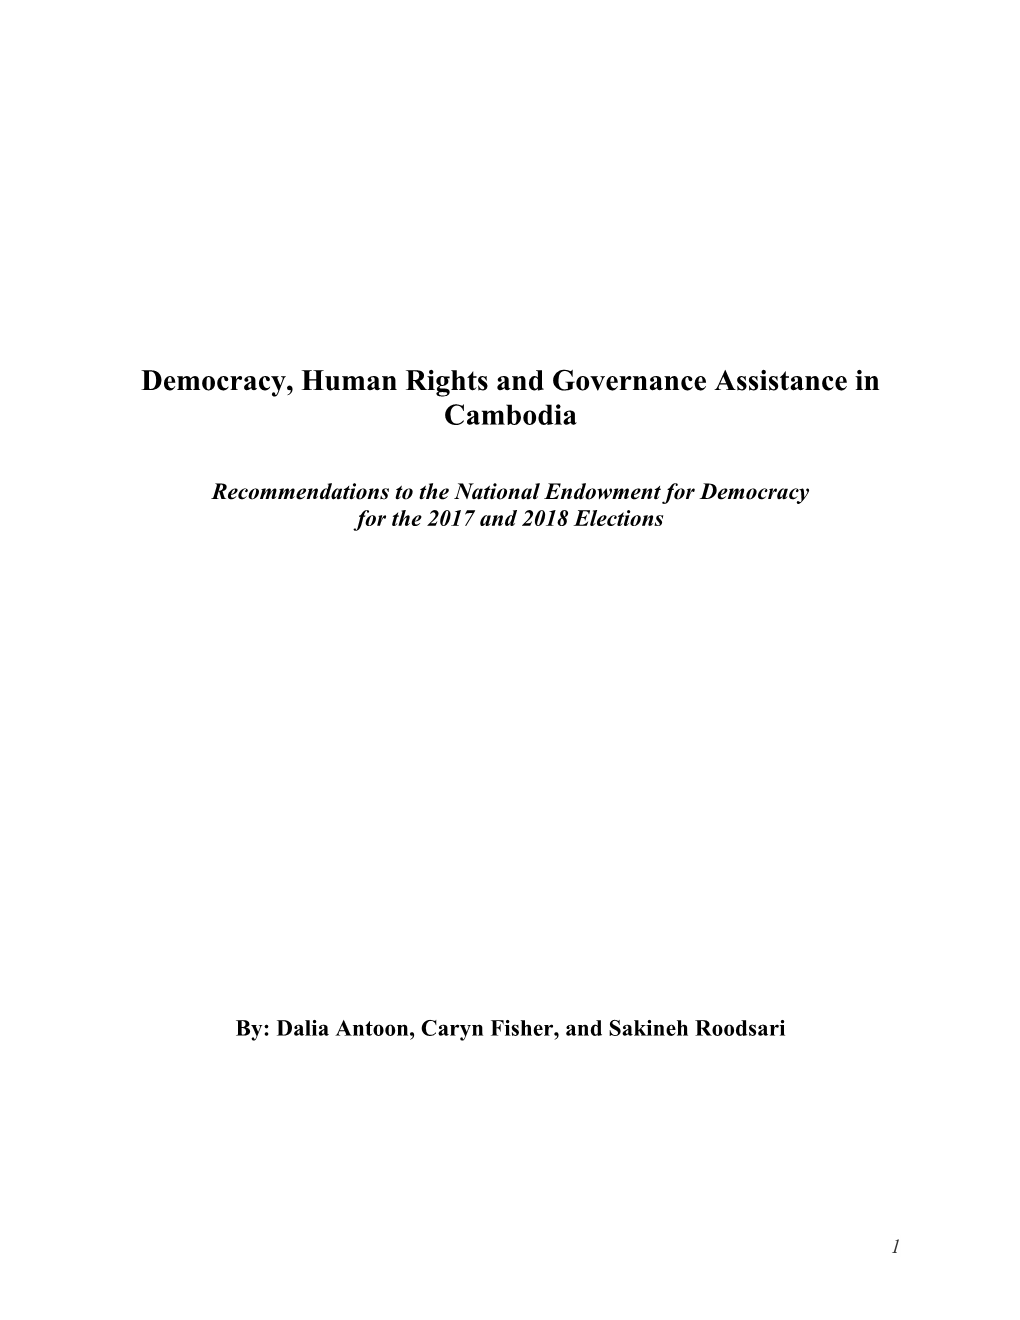 Democracy, Human Rights and Governance Assistance in Cambodia